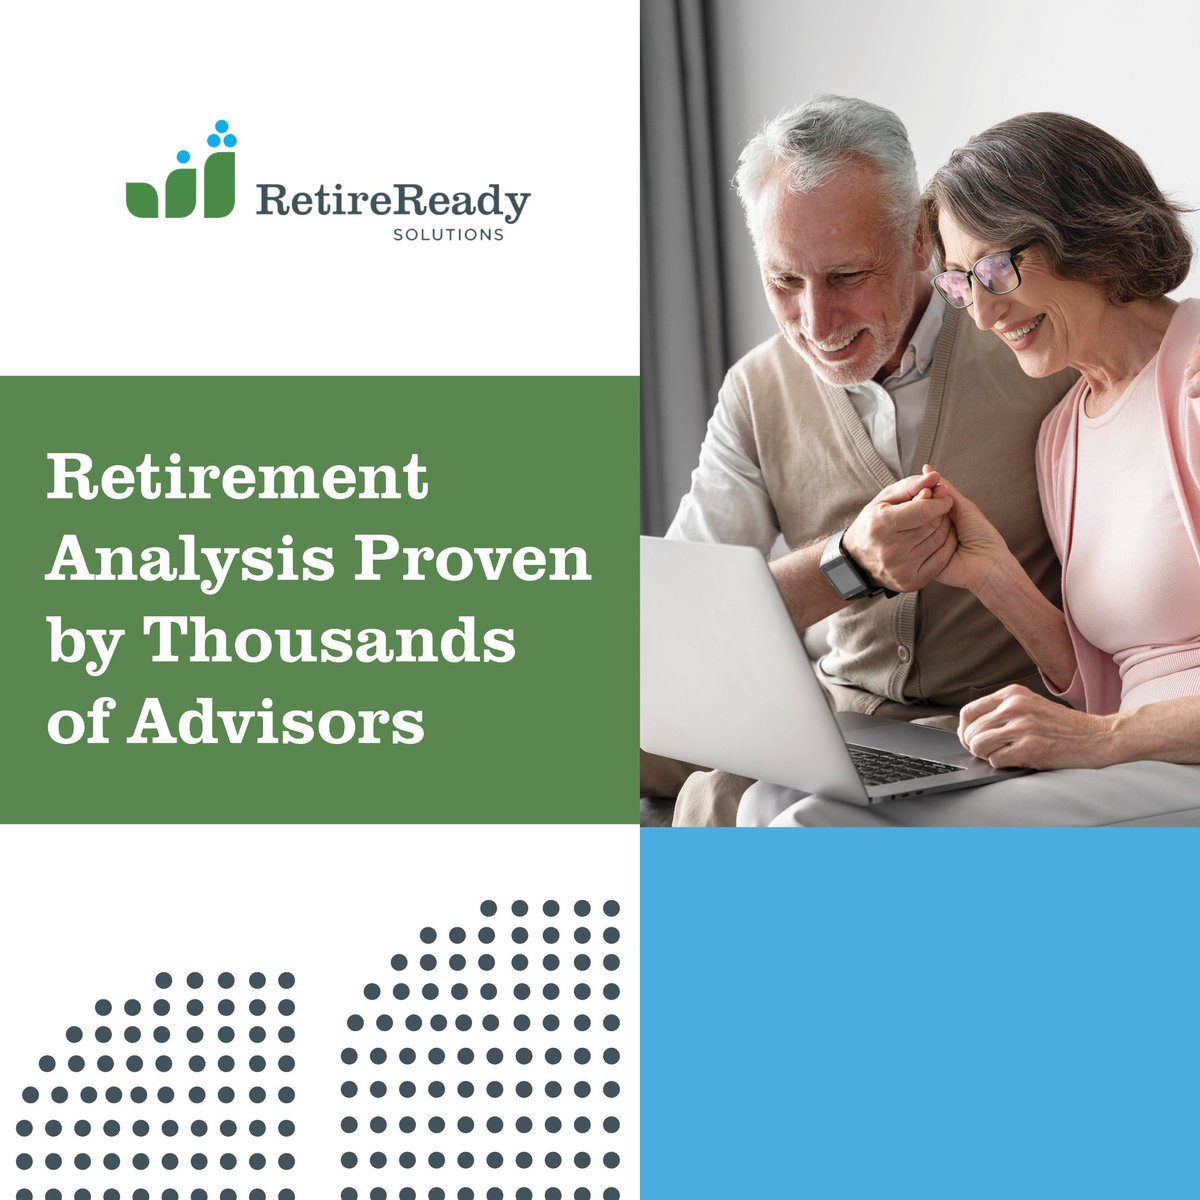 The Retirement Analysis Kit is innovative retirement software with a proven track record of helping advisors engage and motivate people towards retirement readiness. retireready.com #RetireReady #RetirementPlanning #403b #401k #457Plan #TRAK